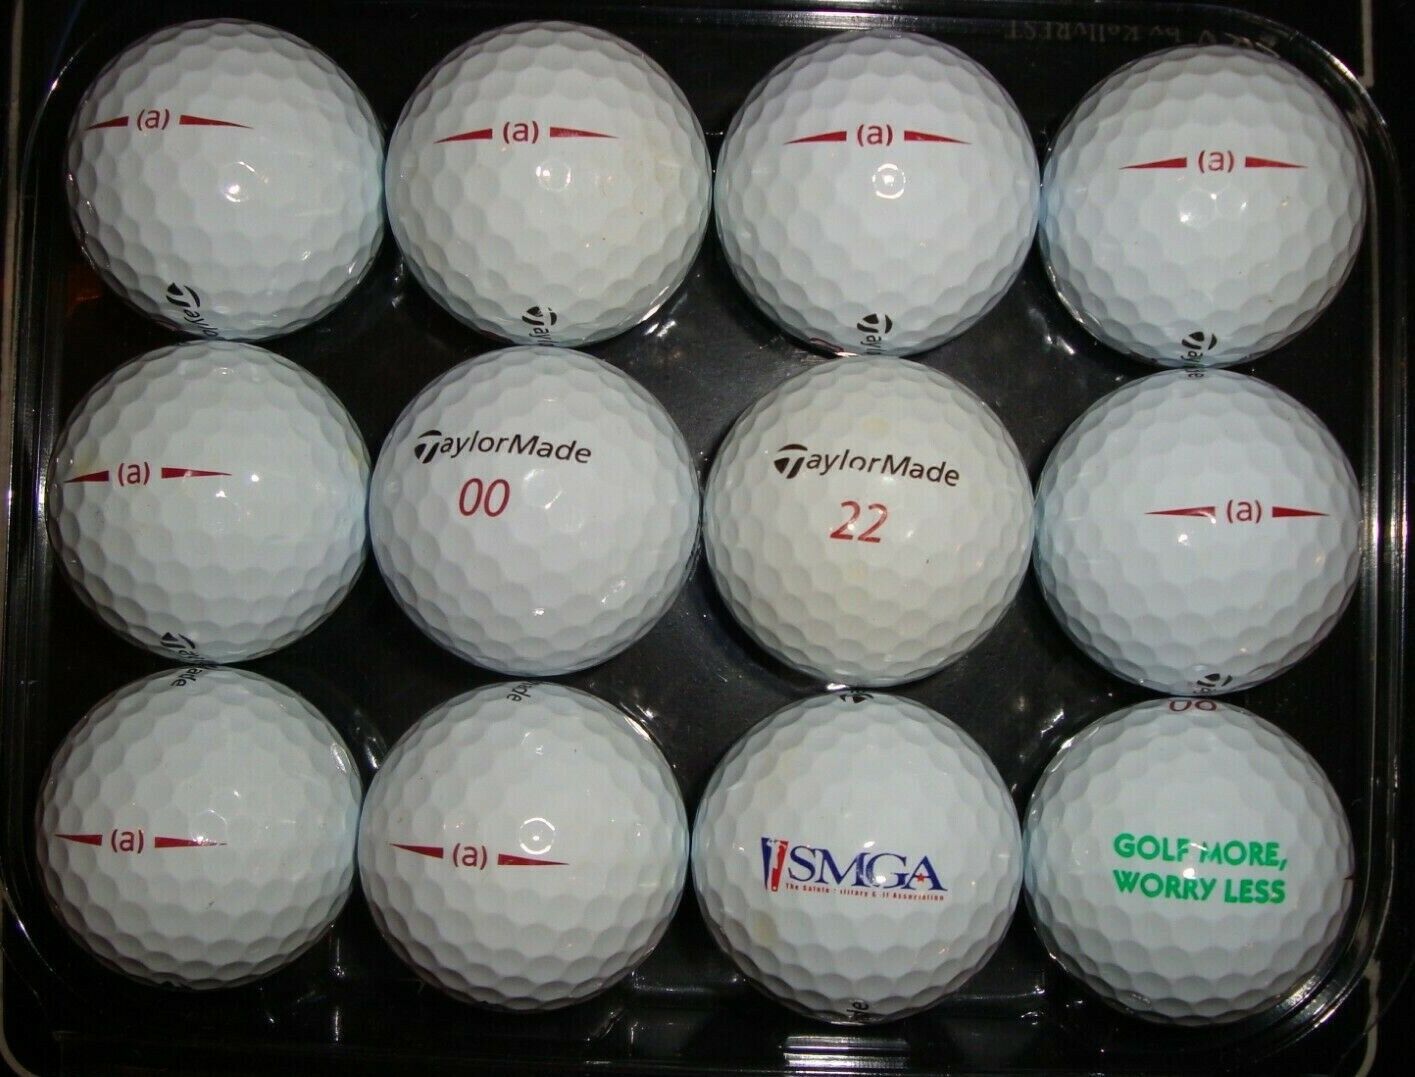 12 Taylormade project (a) used 2020 / 2019 model golf balls 